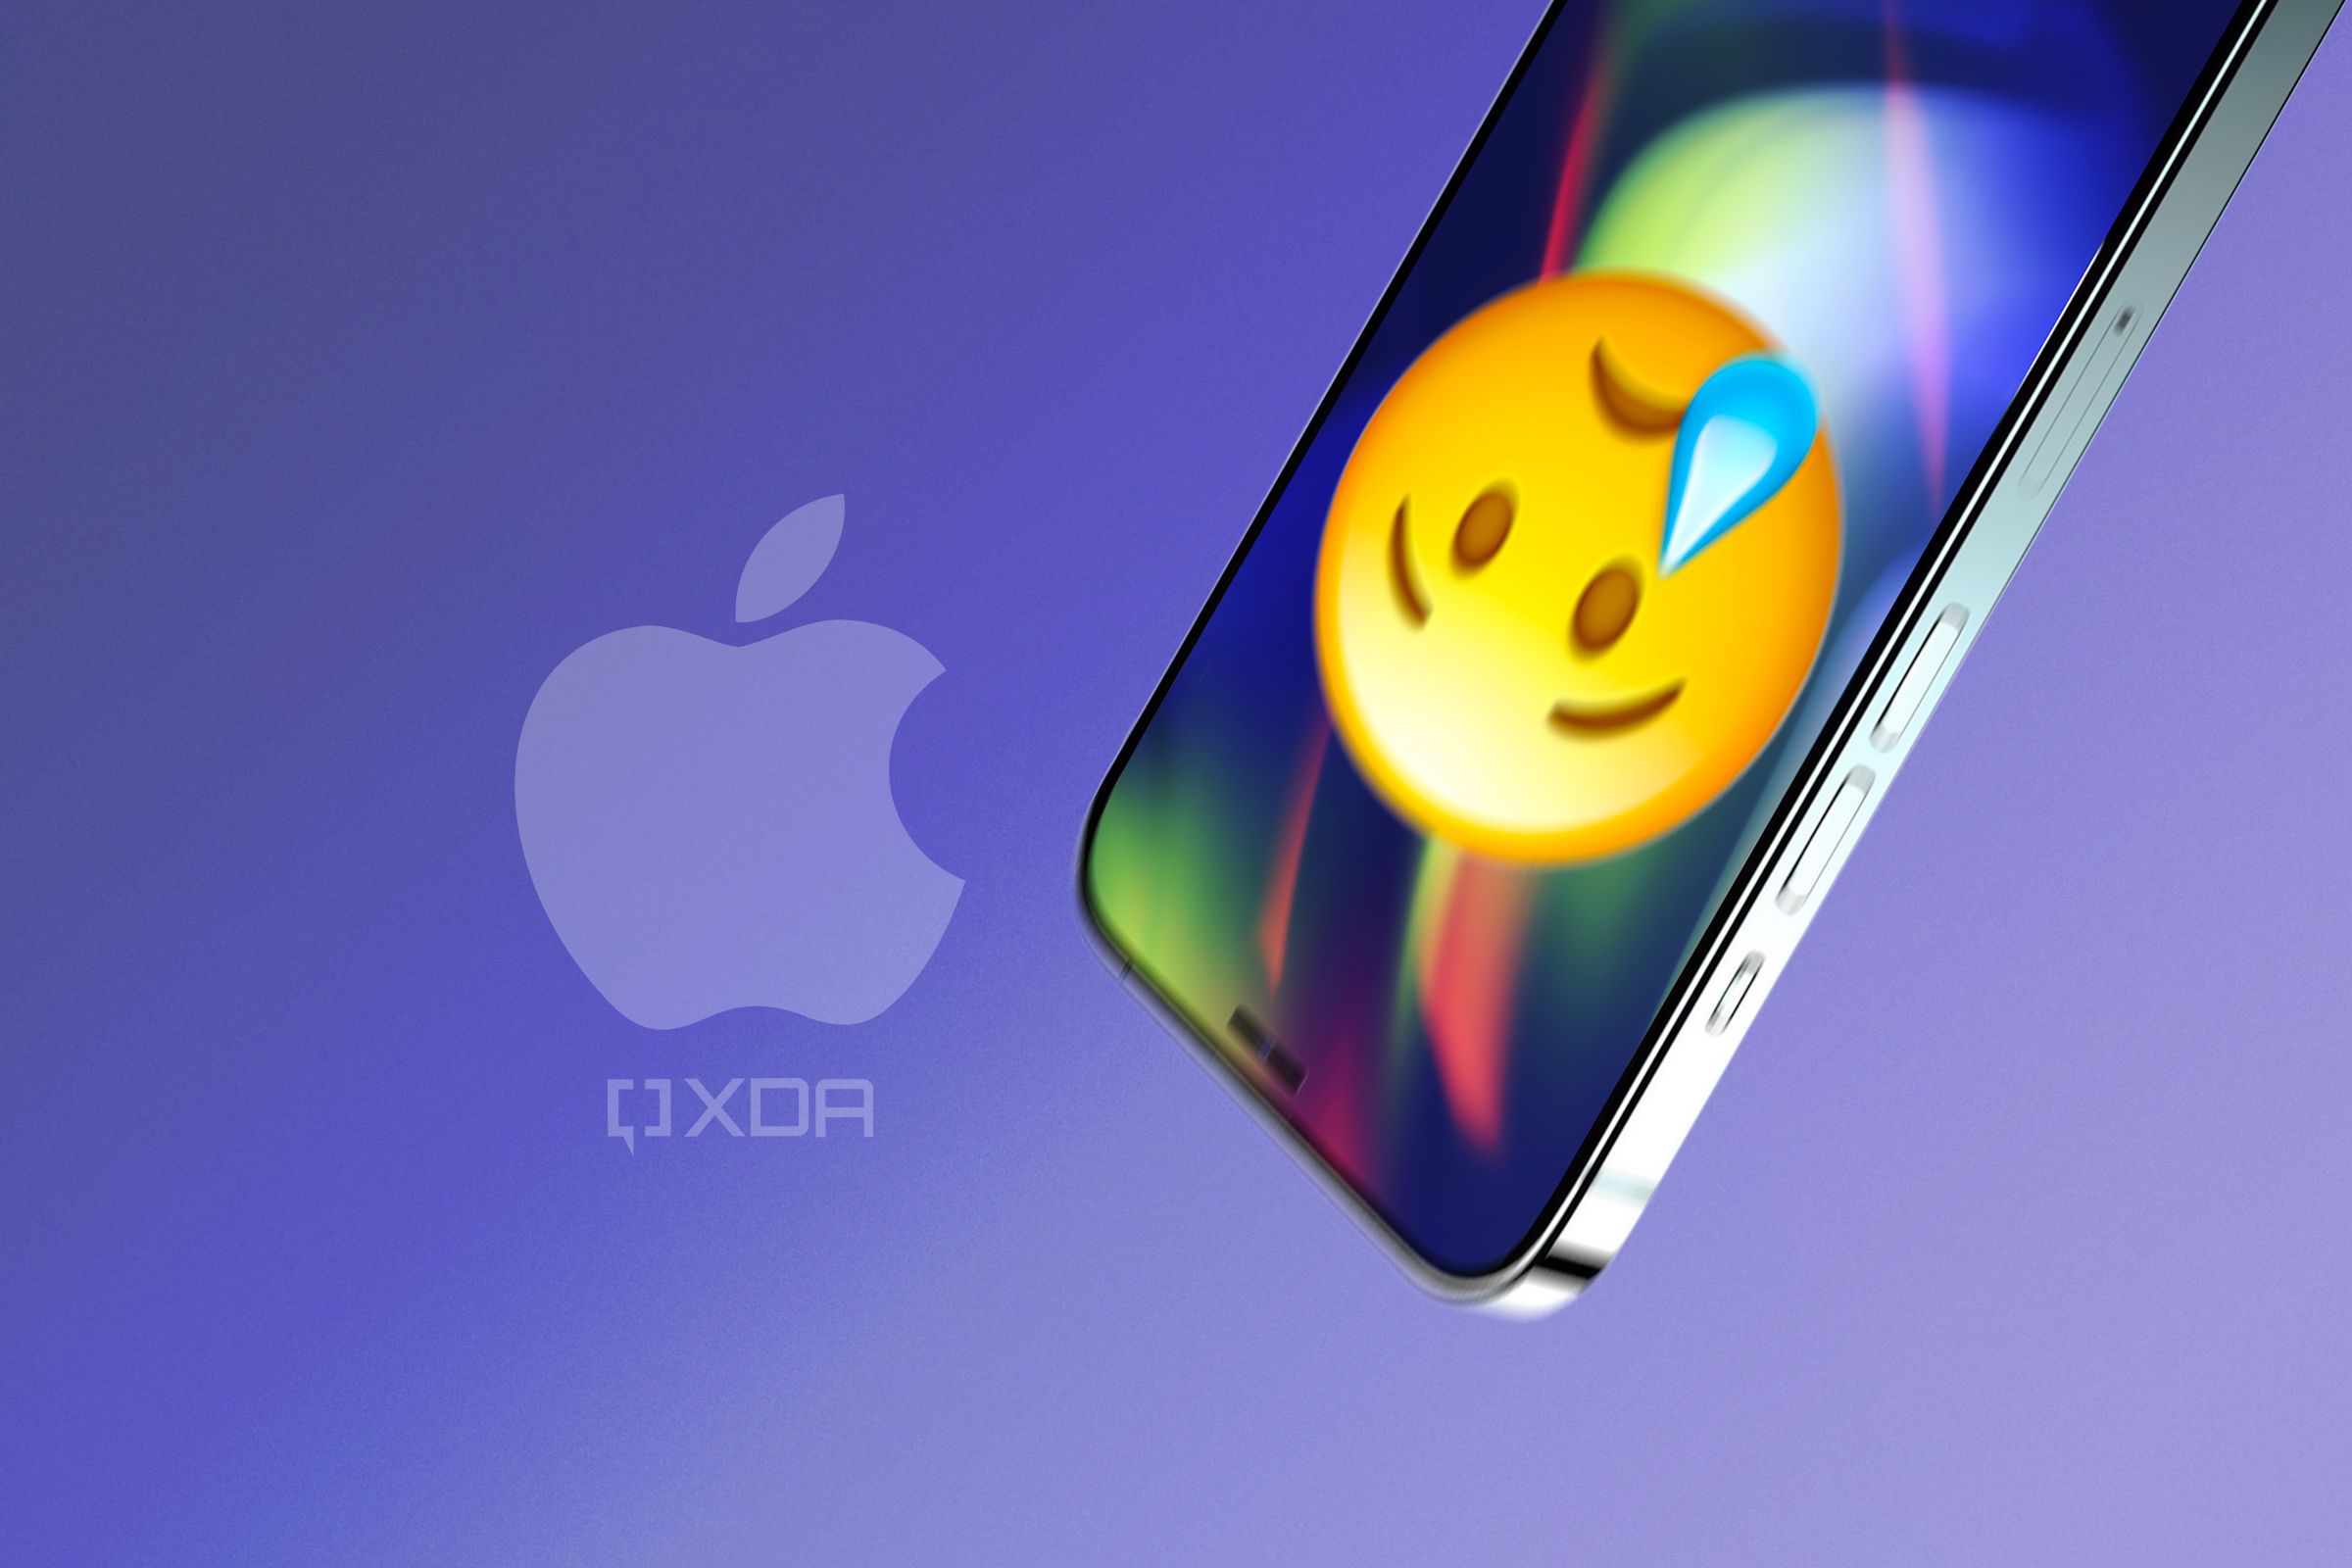 A falling iPhone with a sad face emoji on it next to an Apple logo